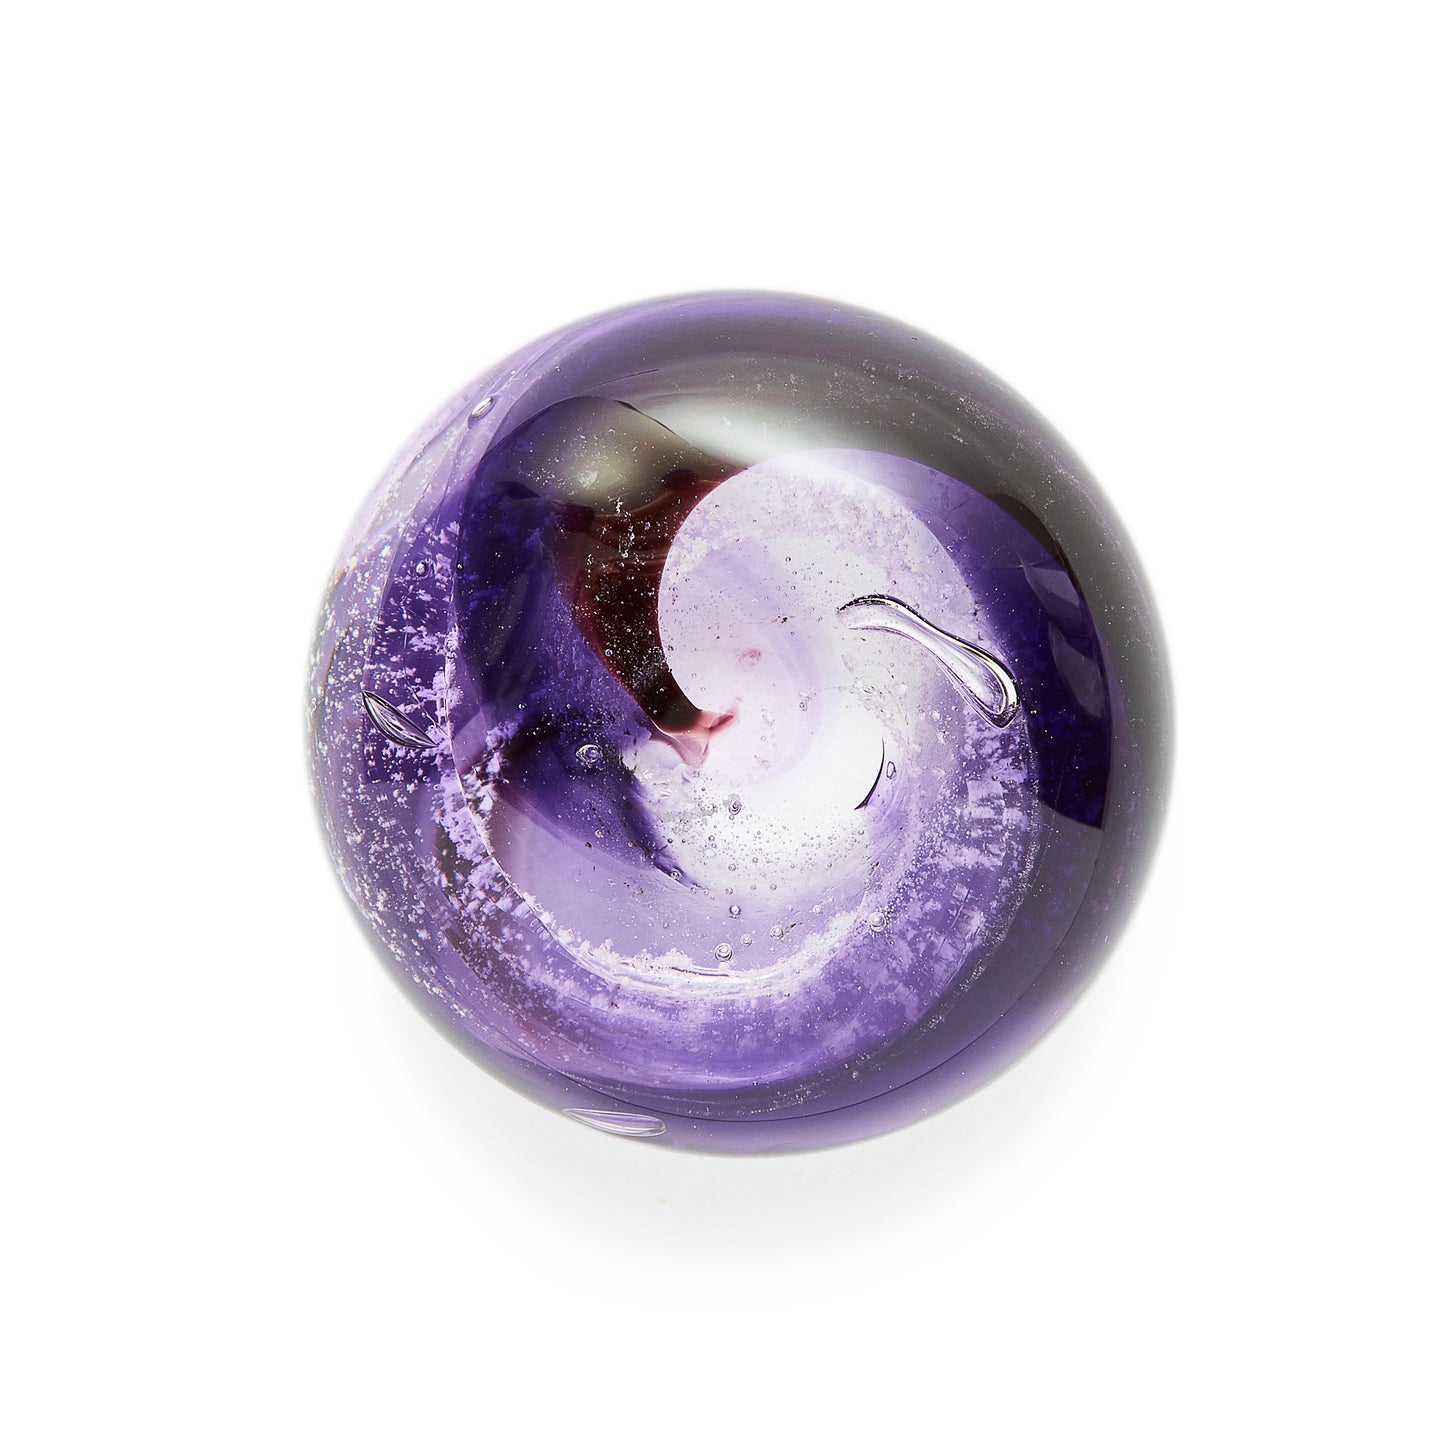 Memorial glass art touchstone with cremation ash. Purple and cranberry glass. Colour combination is called "Amethyst."